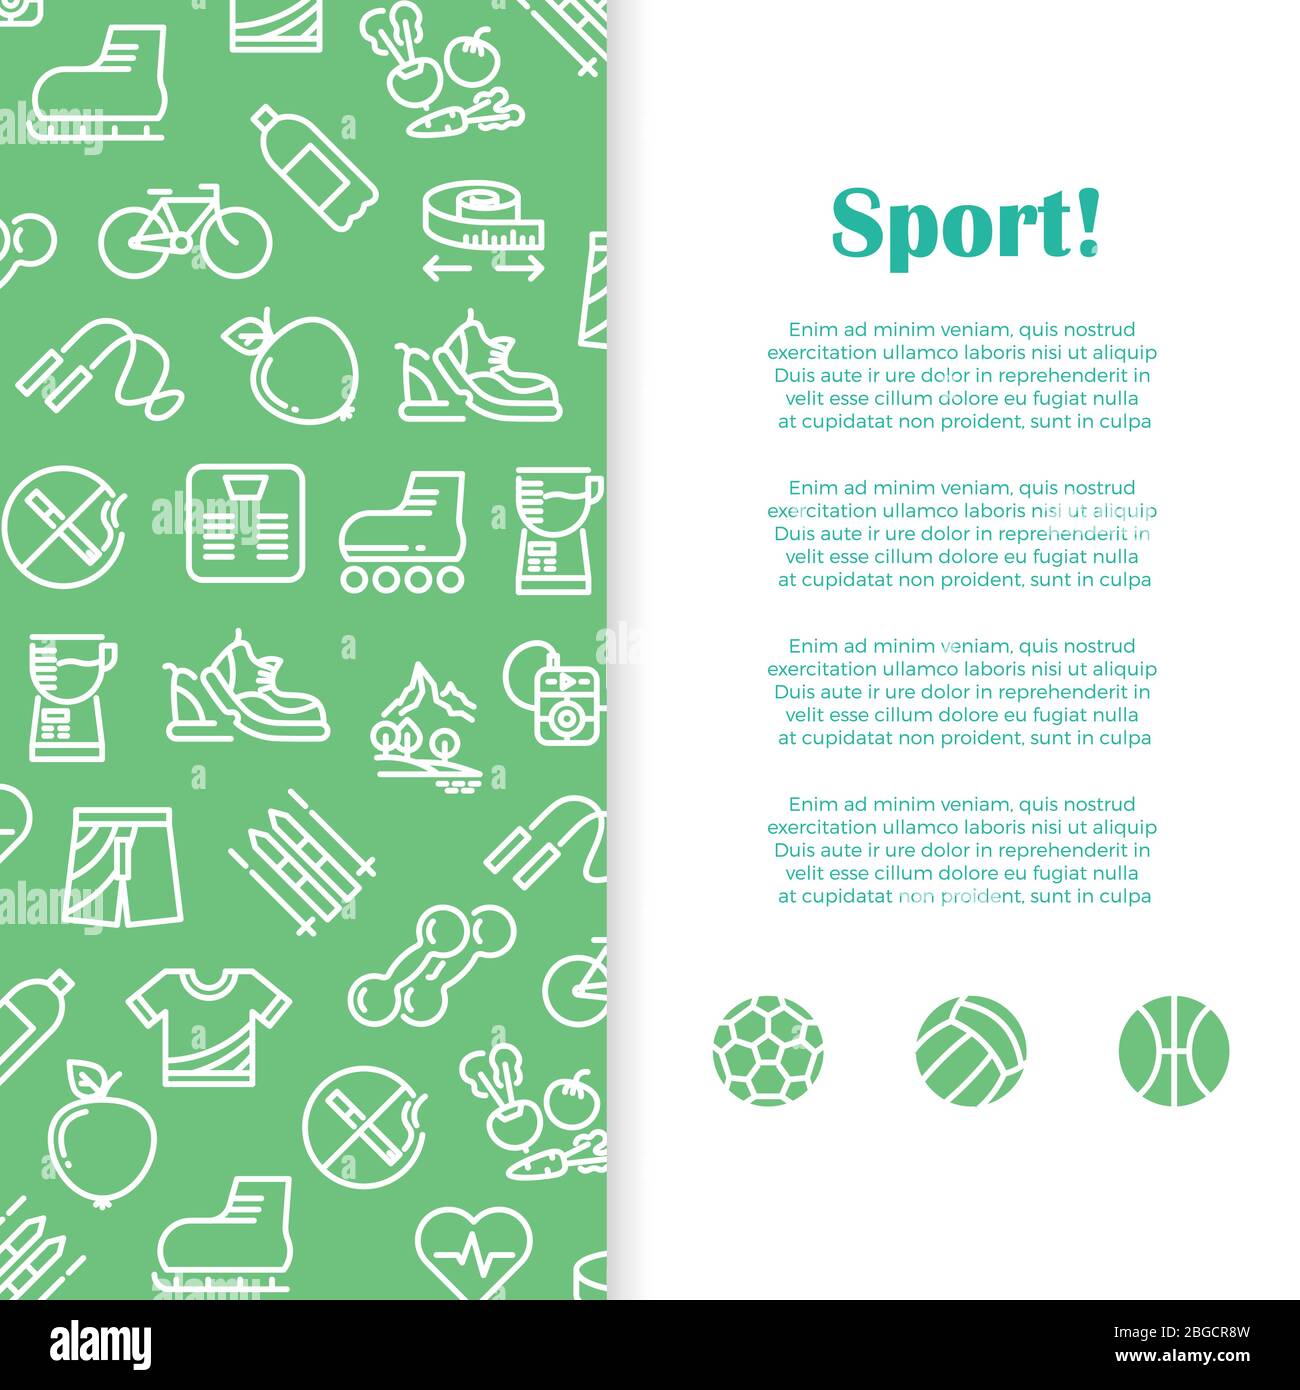 Sports And Fitness Banner Template With Line Icons Sport Banner Training Activity Vector Illustration Stock Vector Image Art Alamy